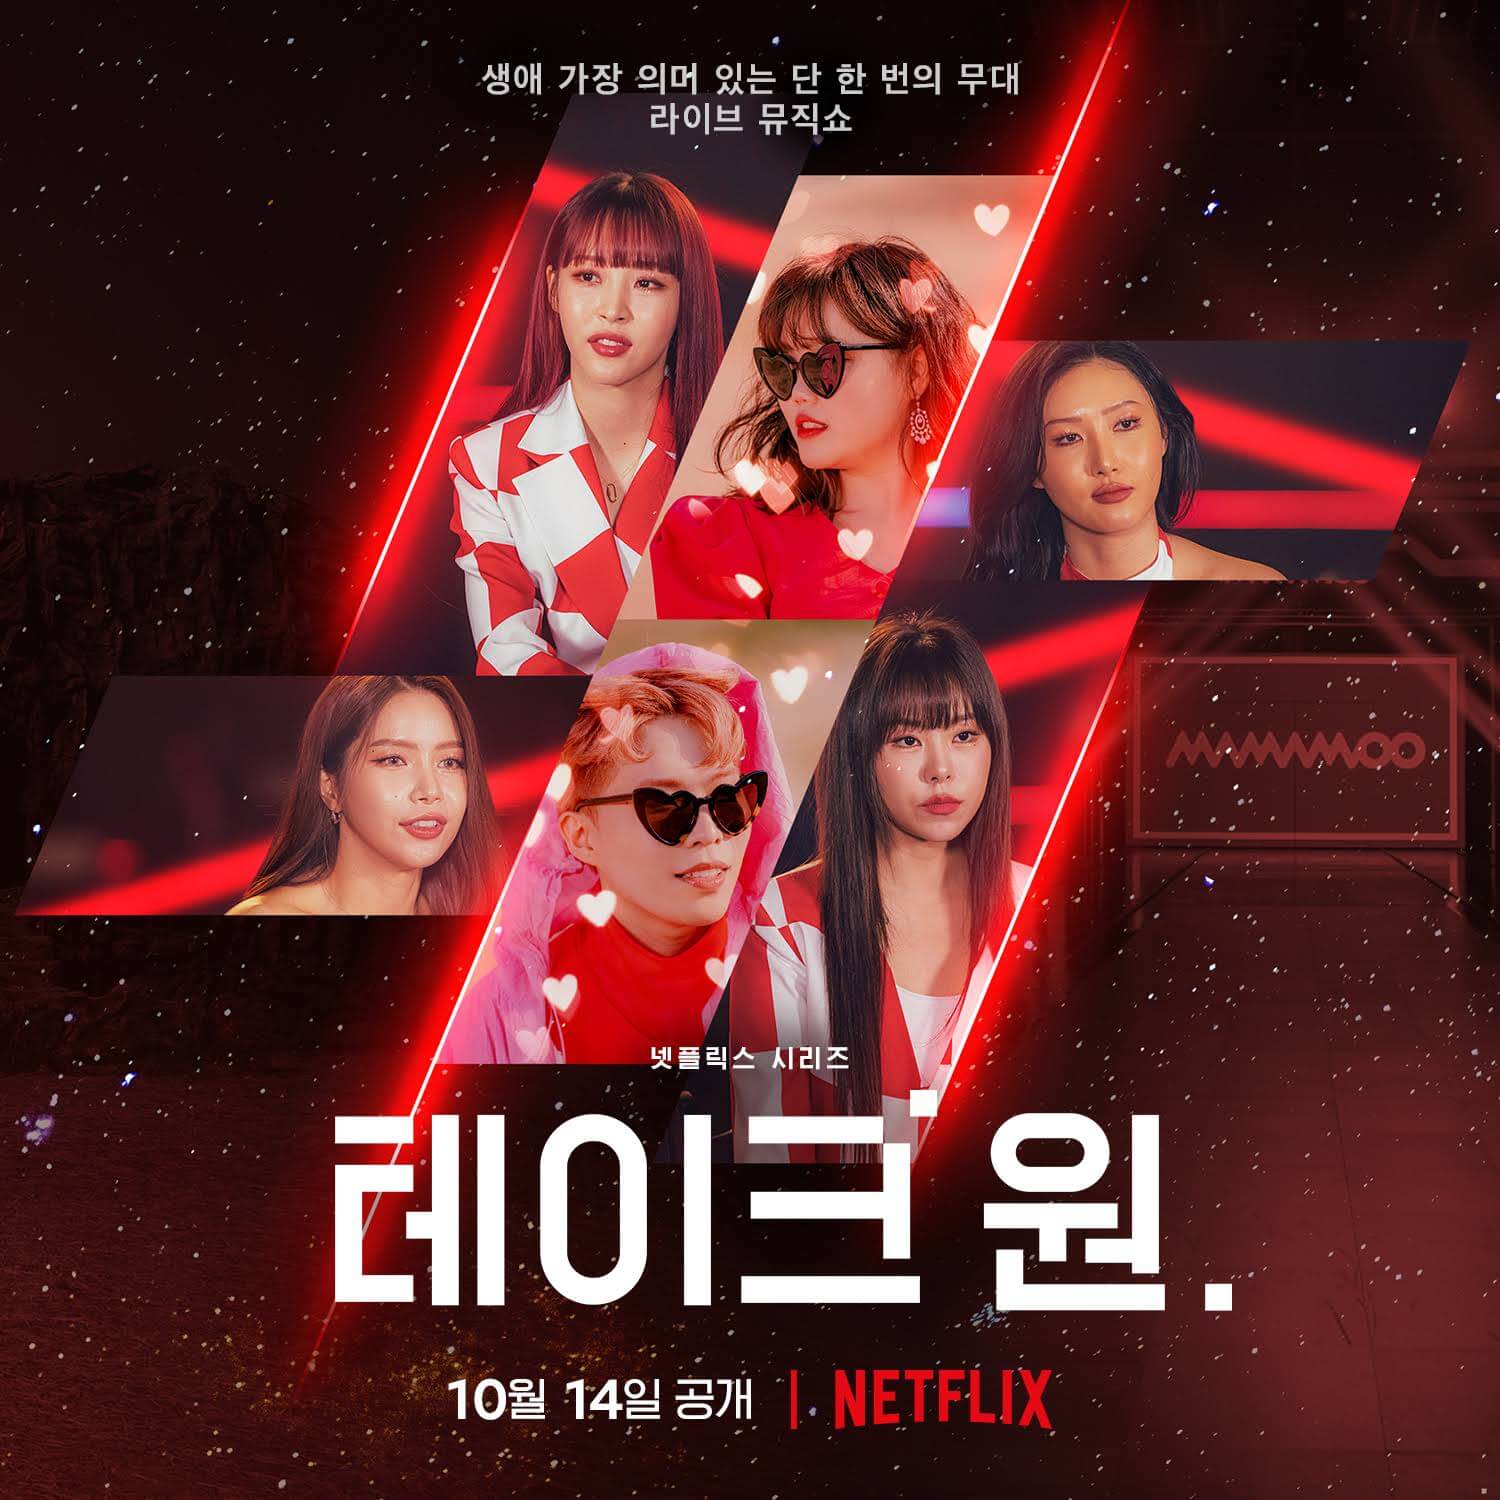 korean music variety show take 1 coming to netflix in october 2022 poster 2